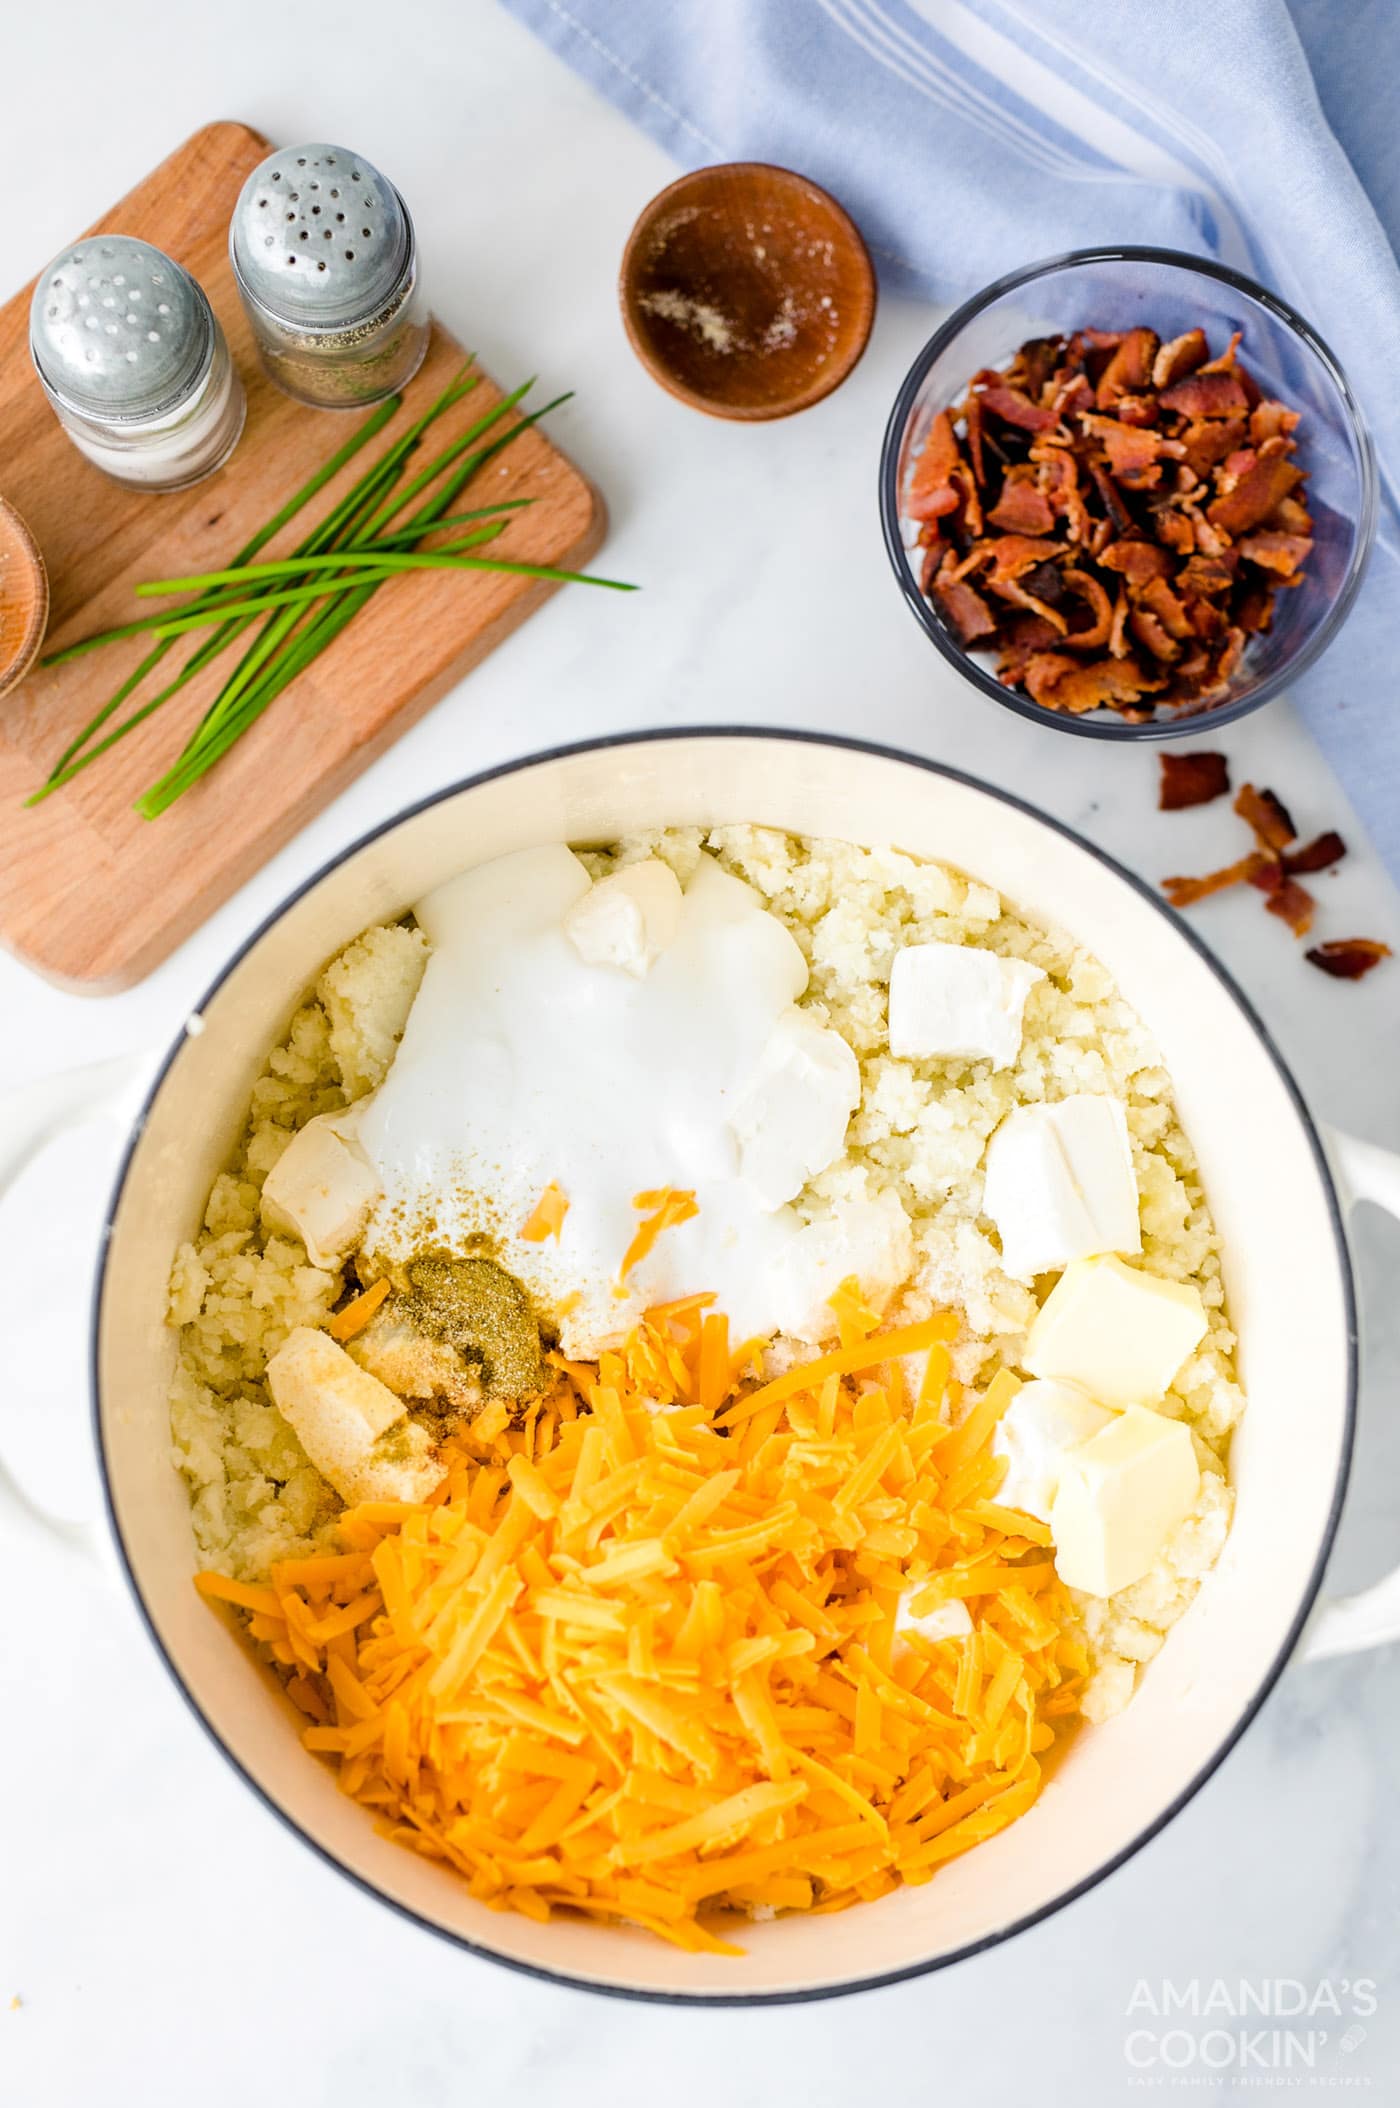 cheese and other ingredients added to potatoes in pot